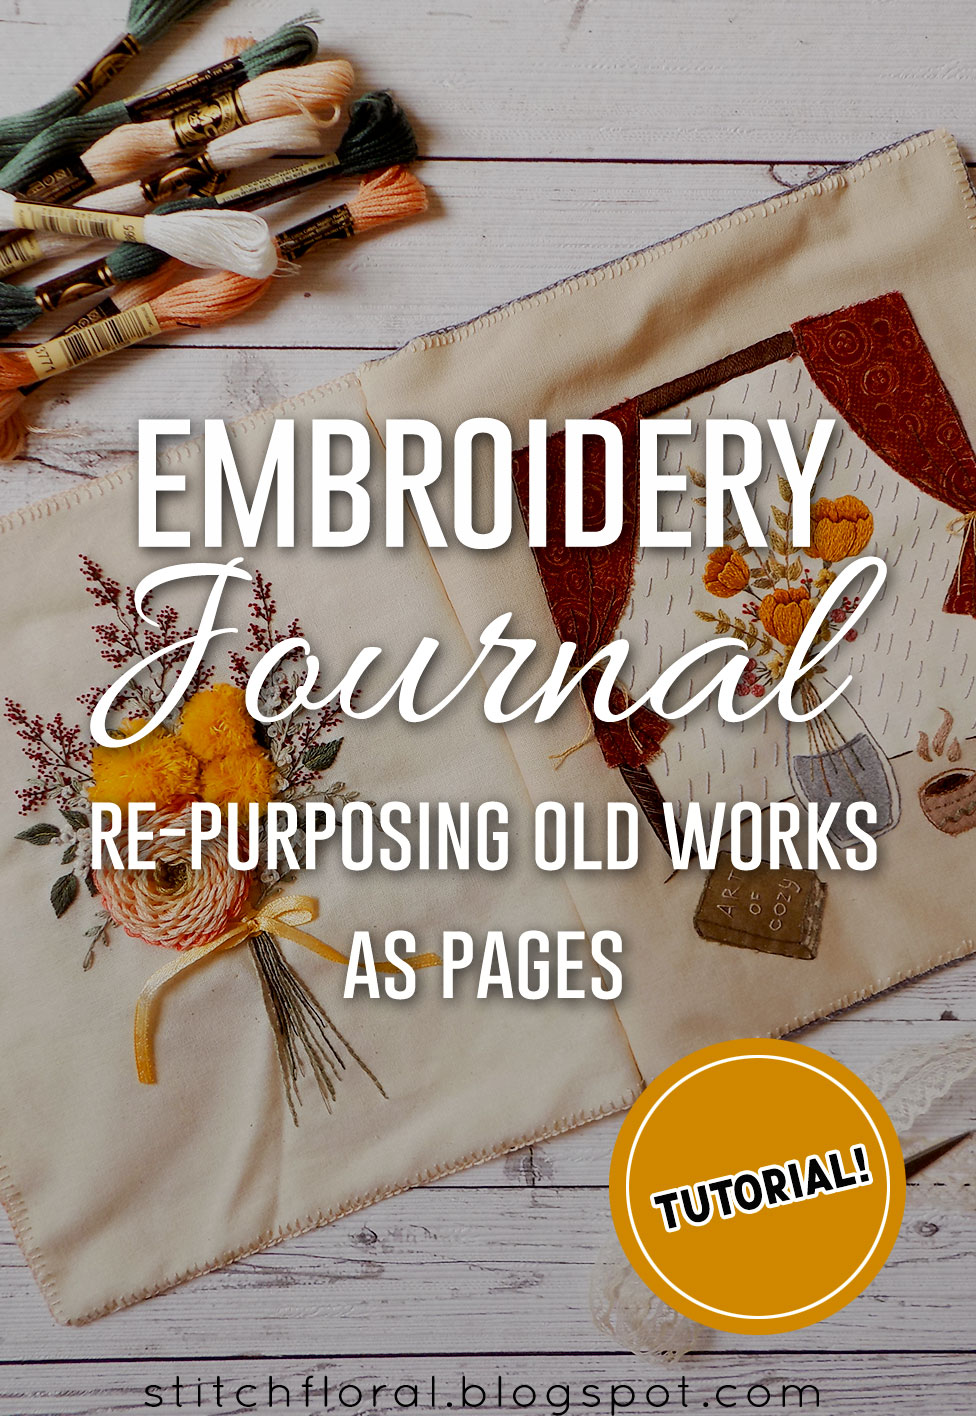 I've started an embroidery journal! I'm excited to get this going